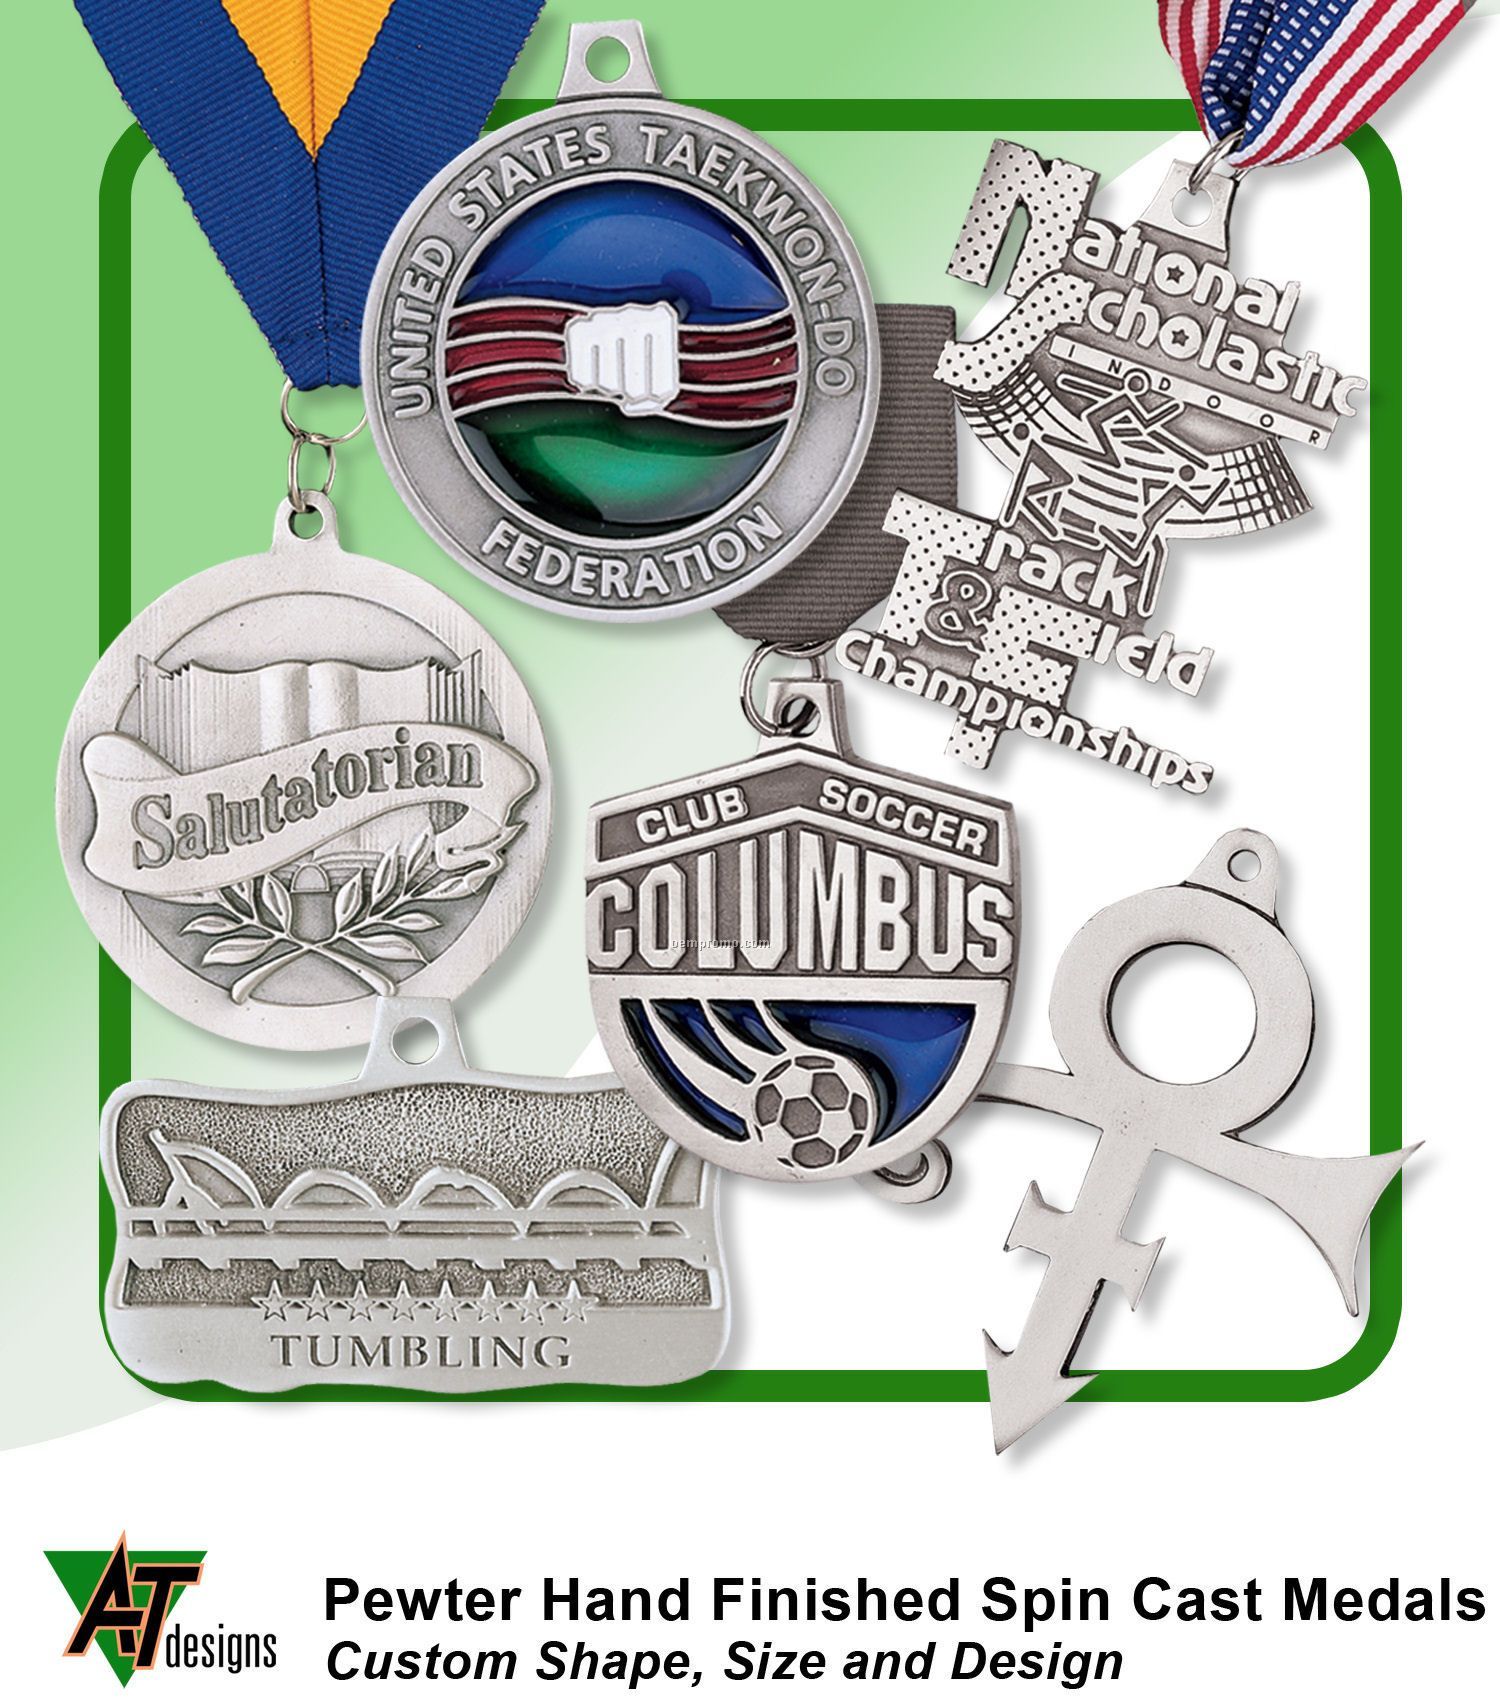 Pewter Medals Spin Cast (1-1/4")